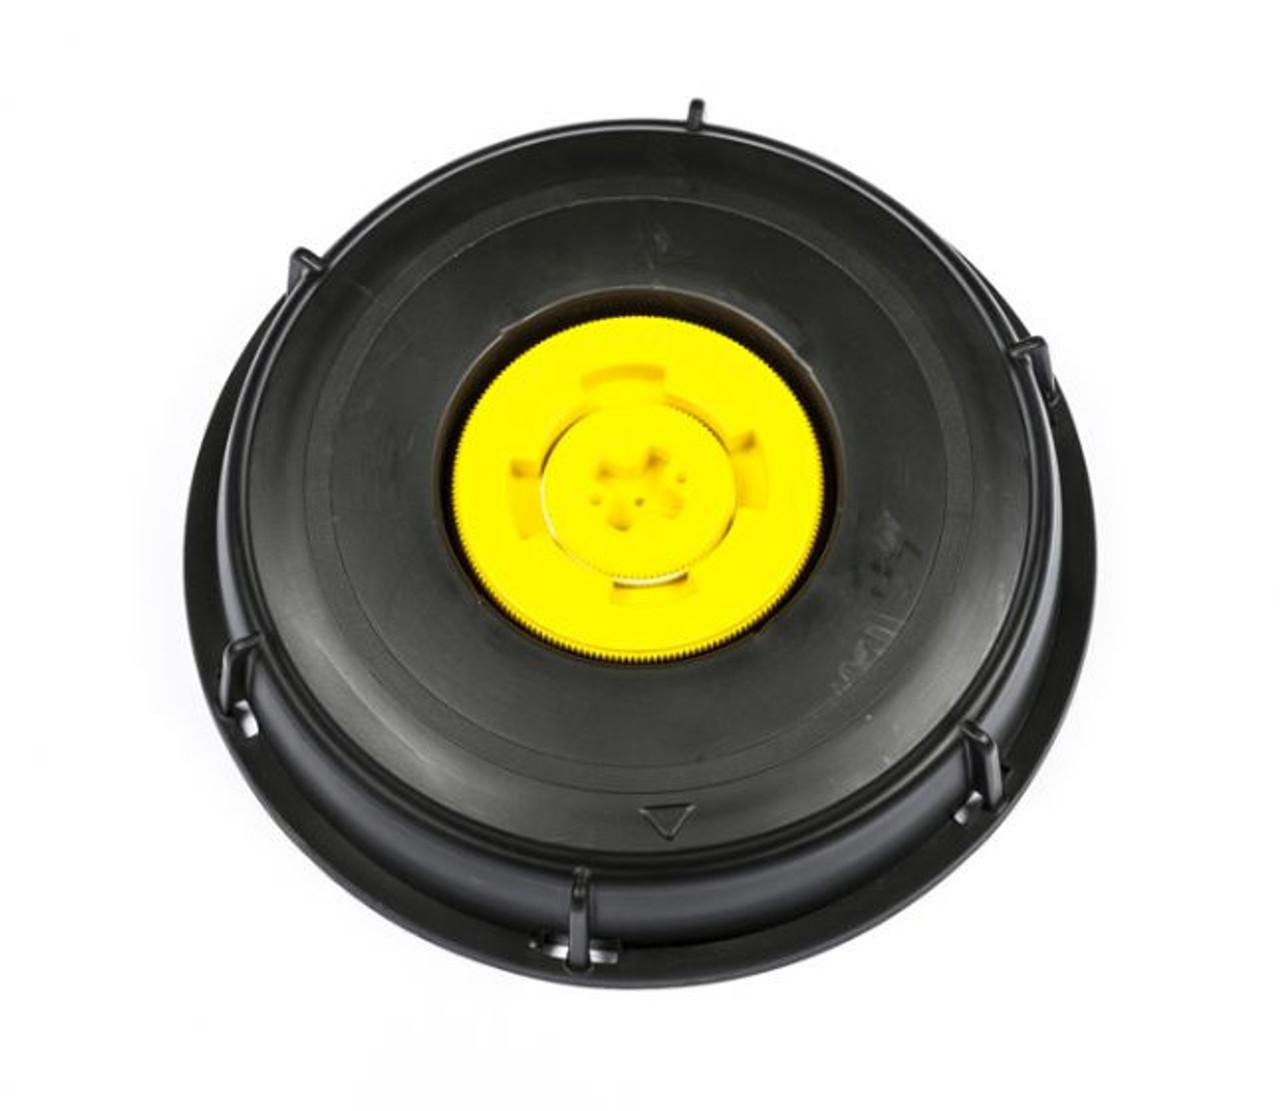 6 INCH POLYPROPYLENE FILL CAP WITH 2 INCH VENT PLUG